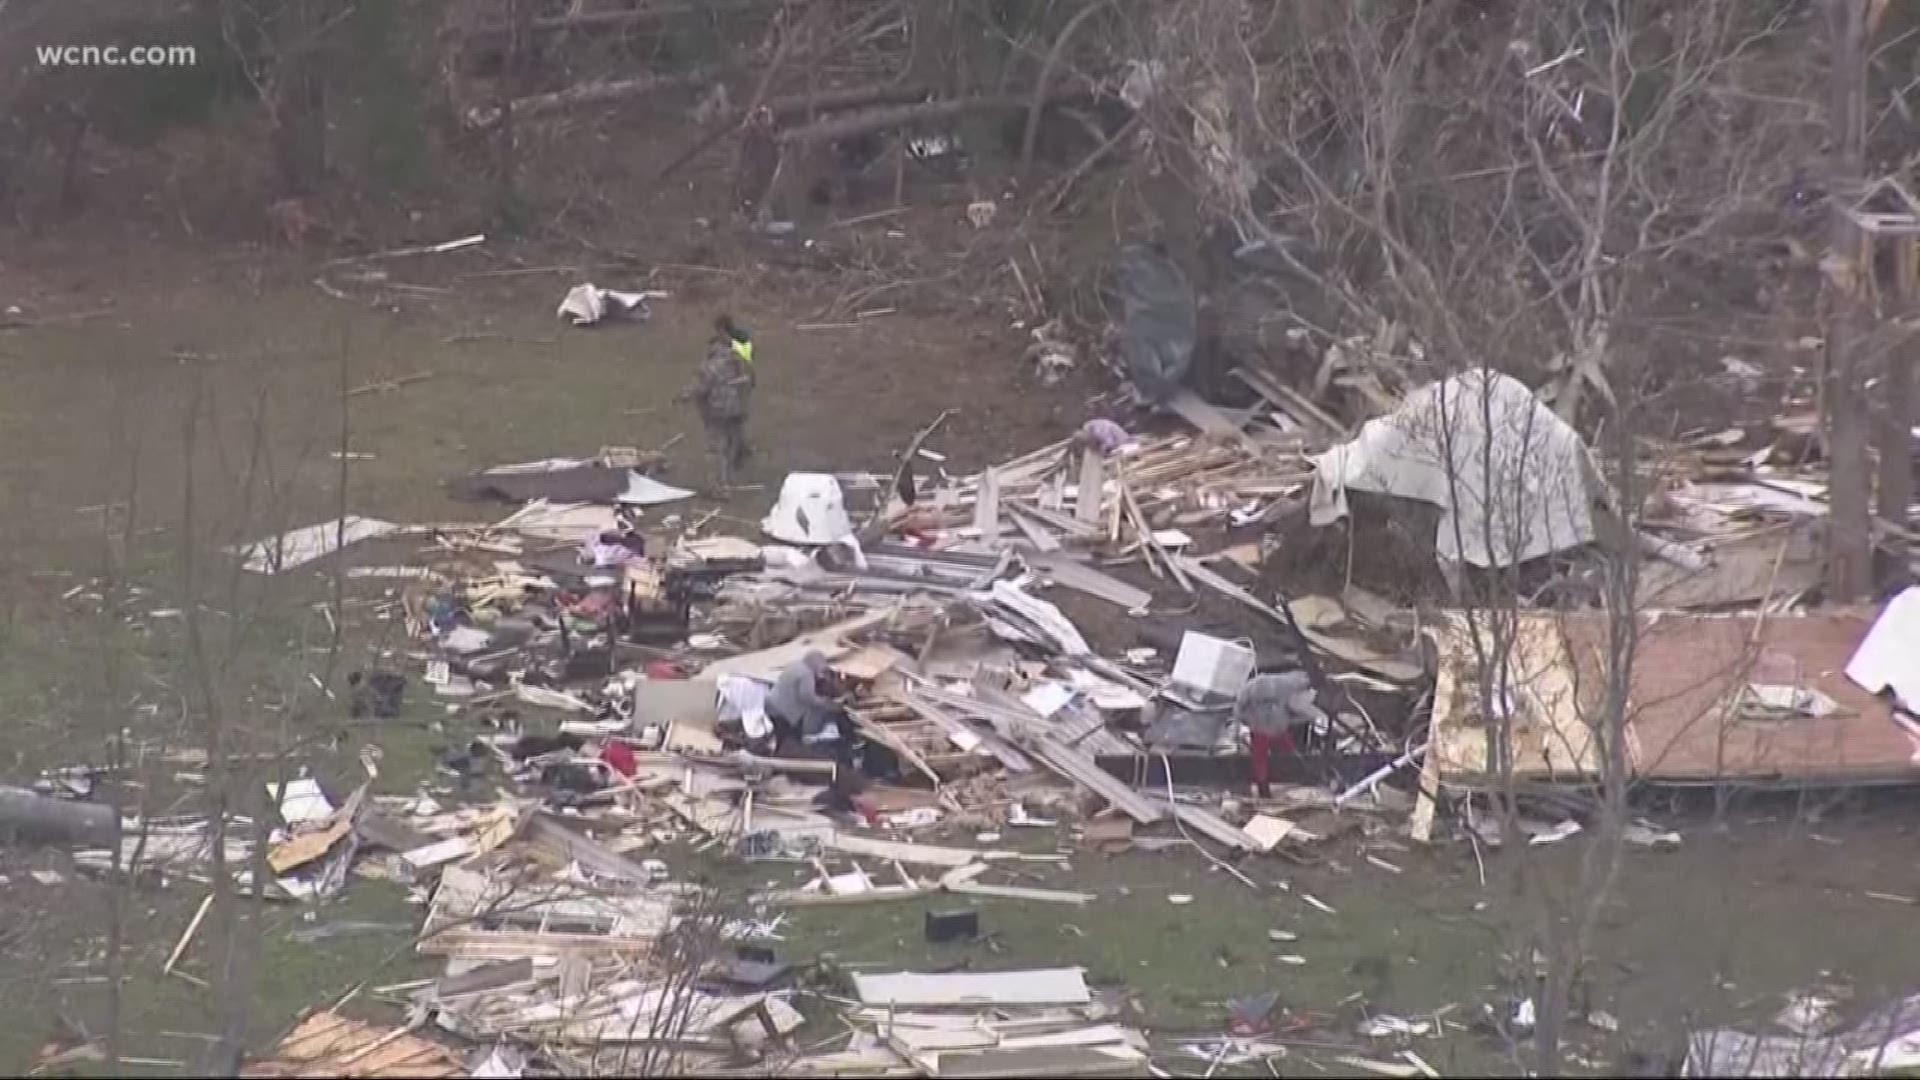 The entire state of North Carolina will practice tornado safety as part of Severe Weather Preparedness Week, just days after deadly tornadoes swept through the southeast.